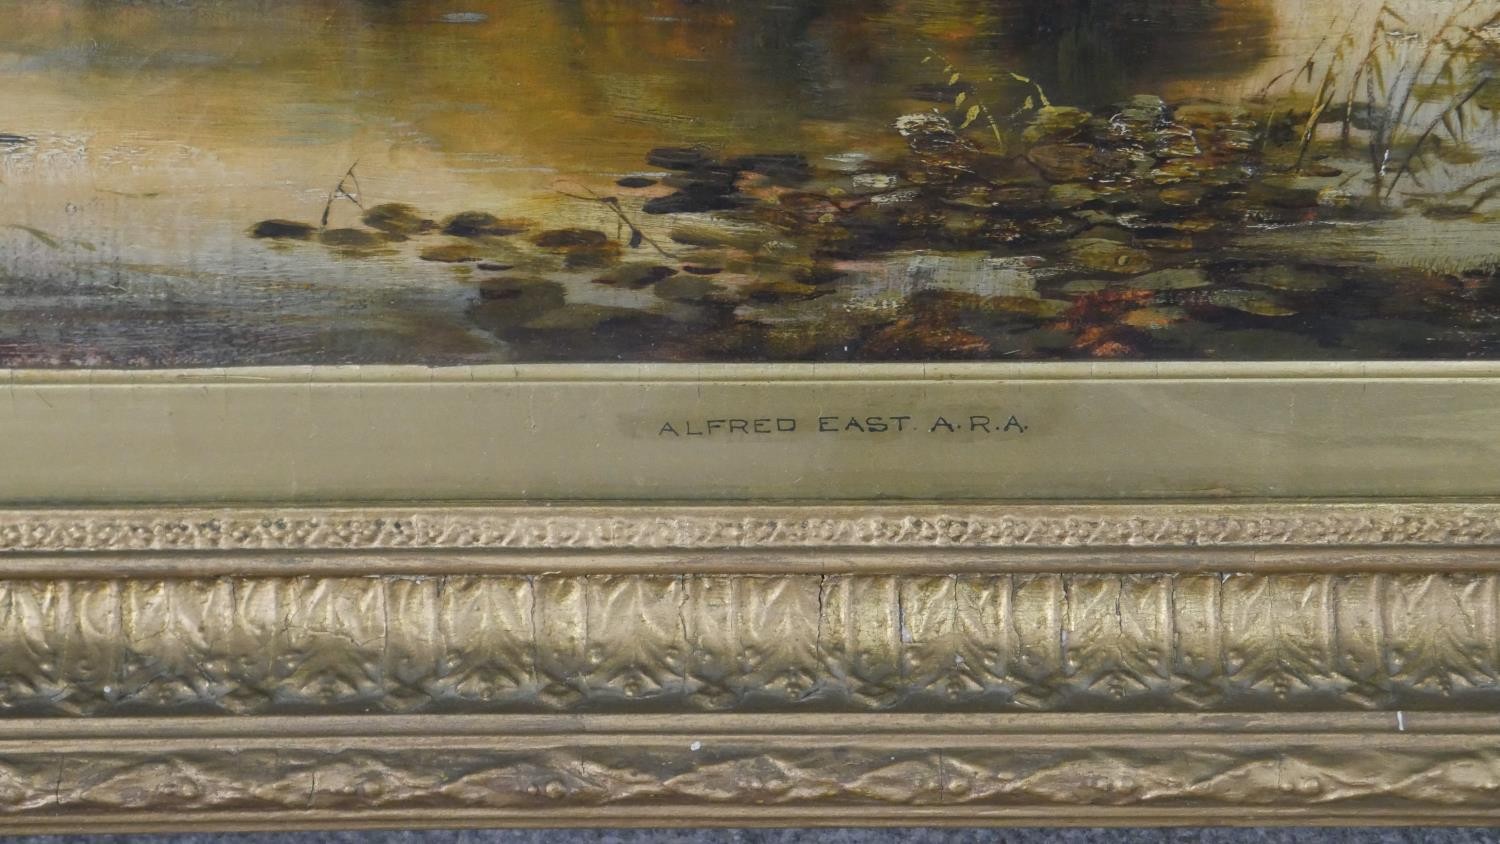 Sir Alfred East, ARA, British (1849 - 1913) - a 19th century oil on canvas of a lake scene at - Image 3 of 7